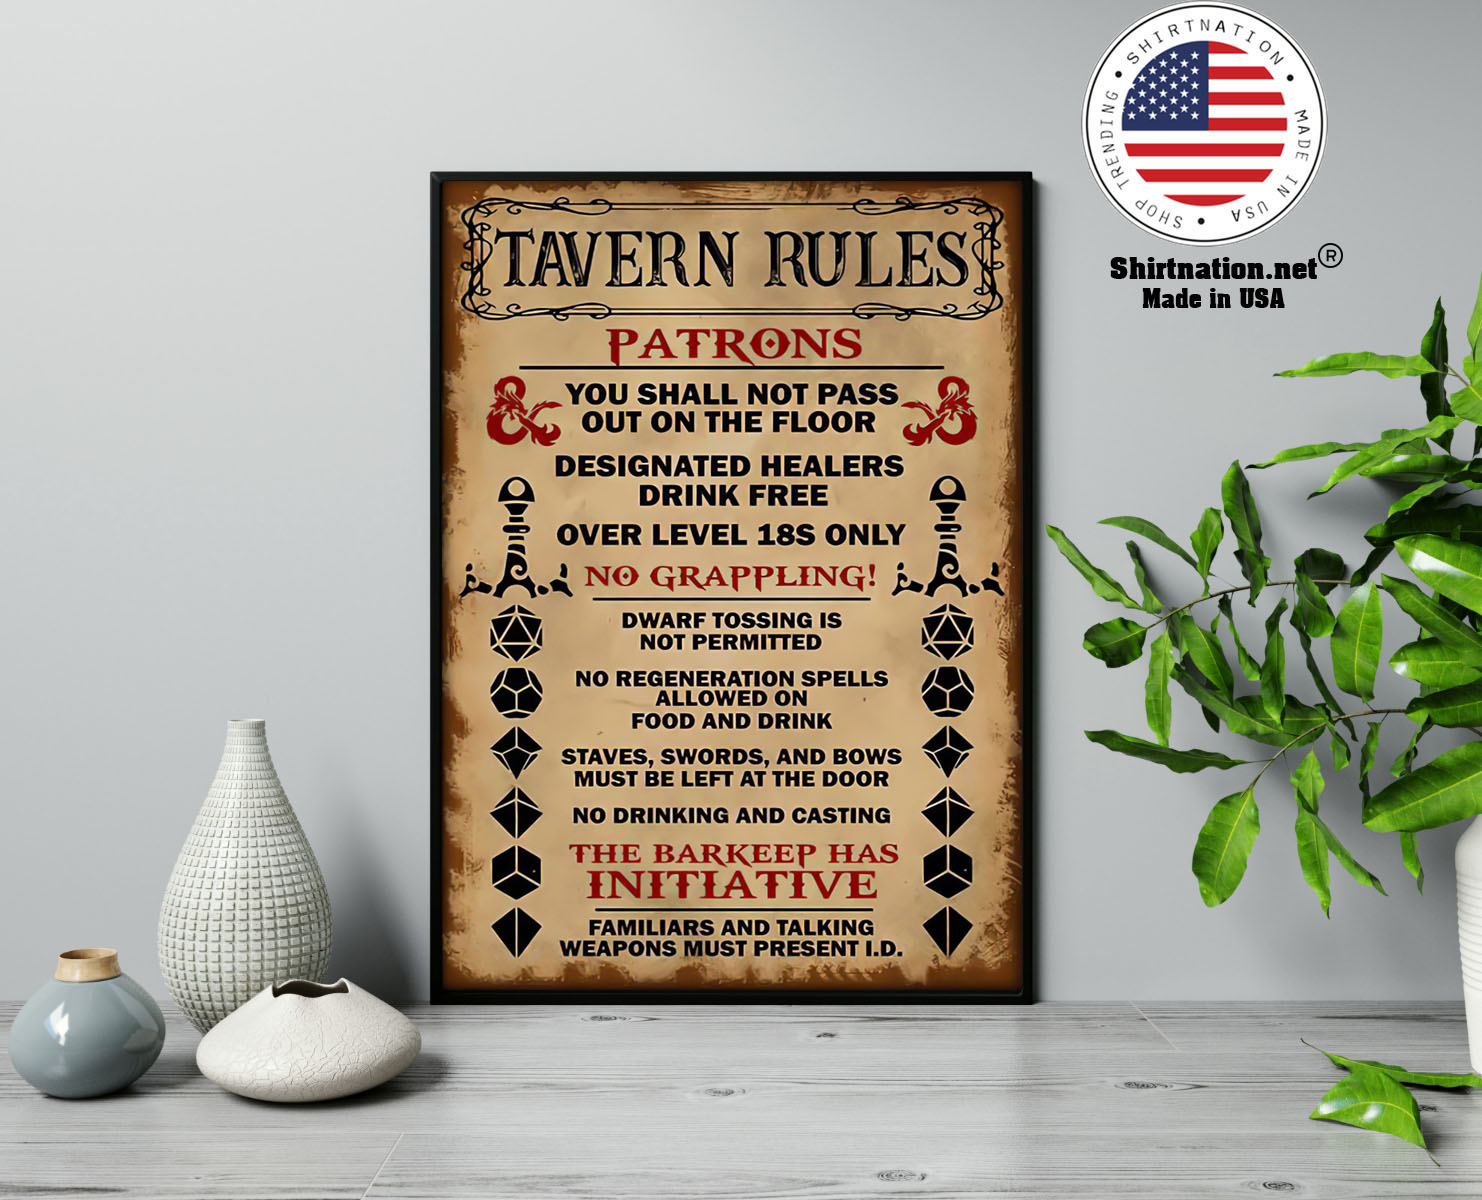 Tavern rules patrons you shall not pass out on the floor poster 13